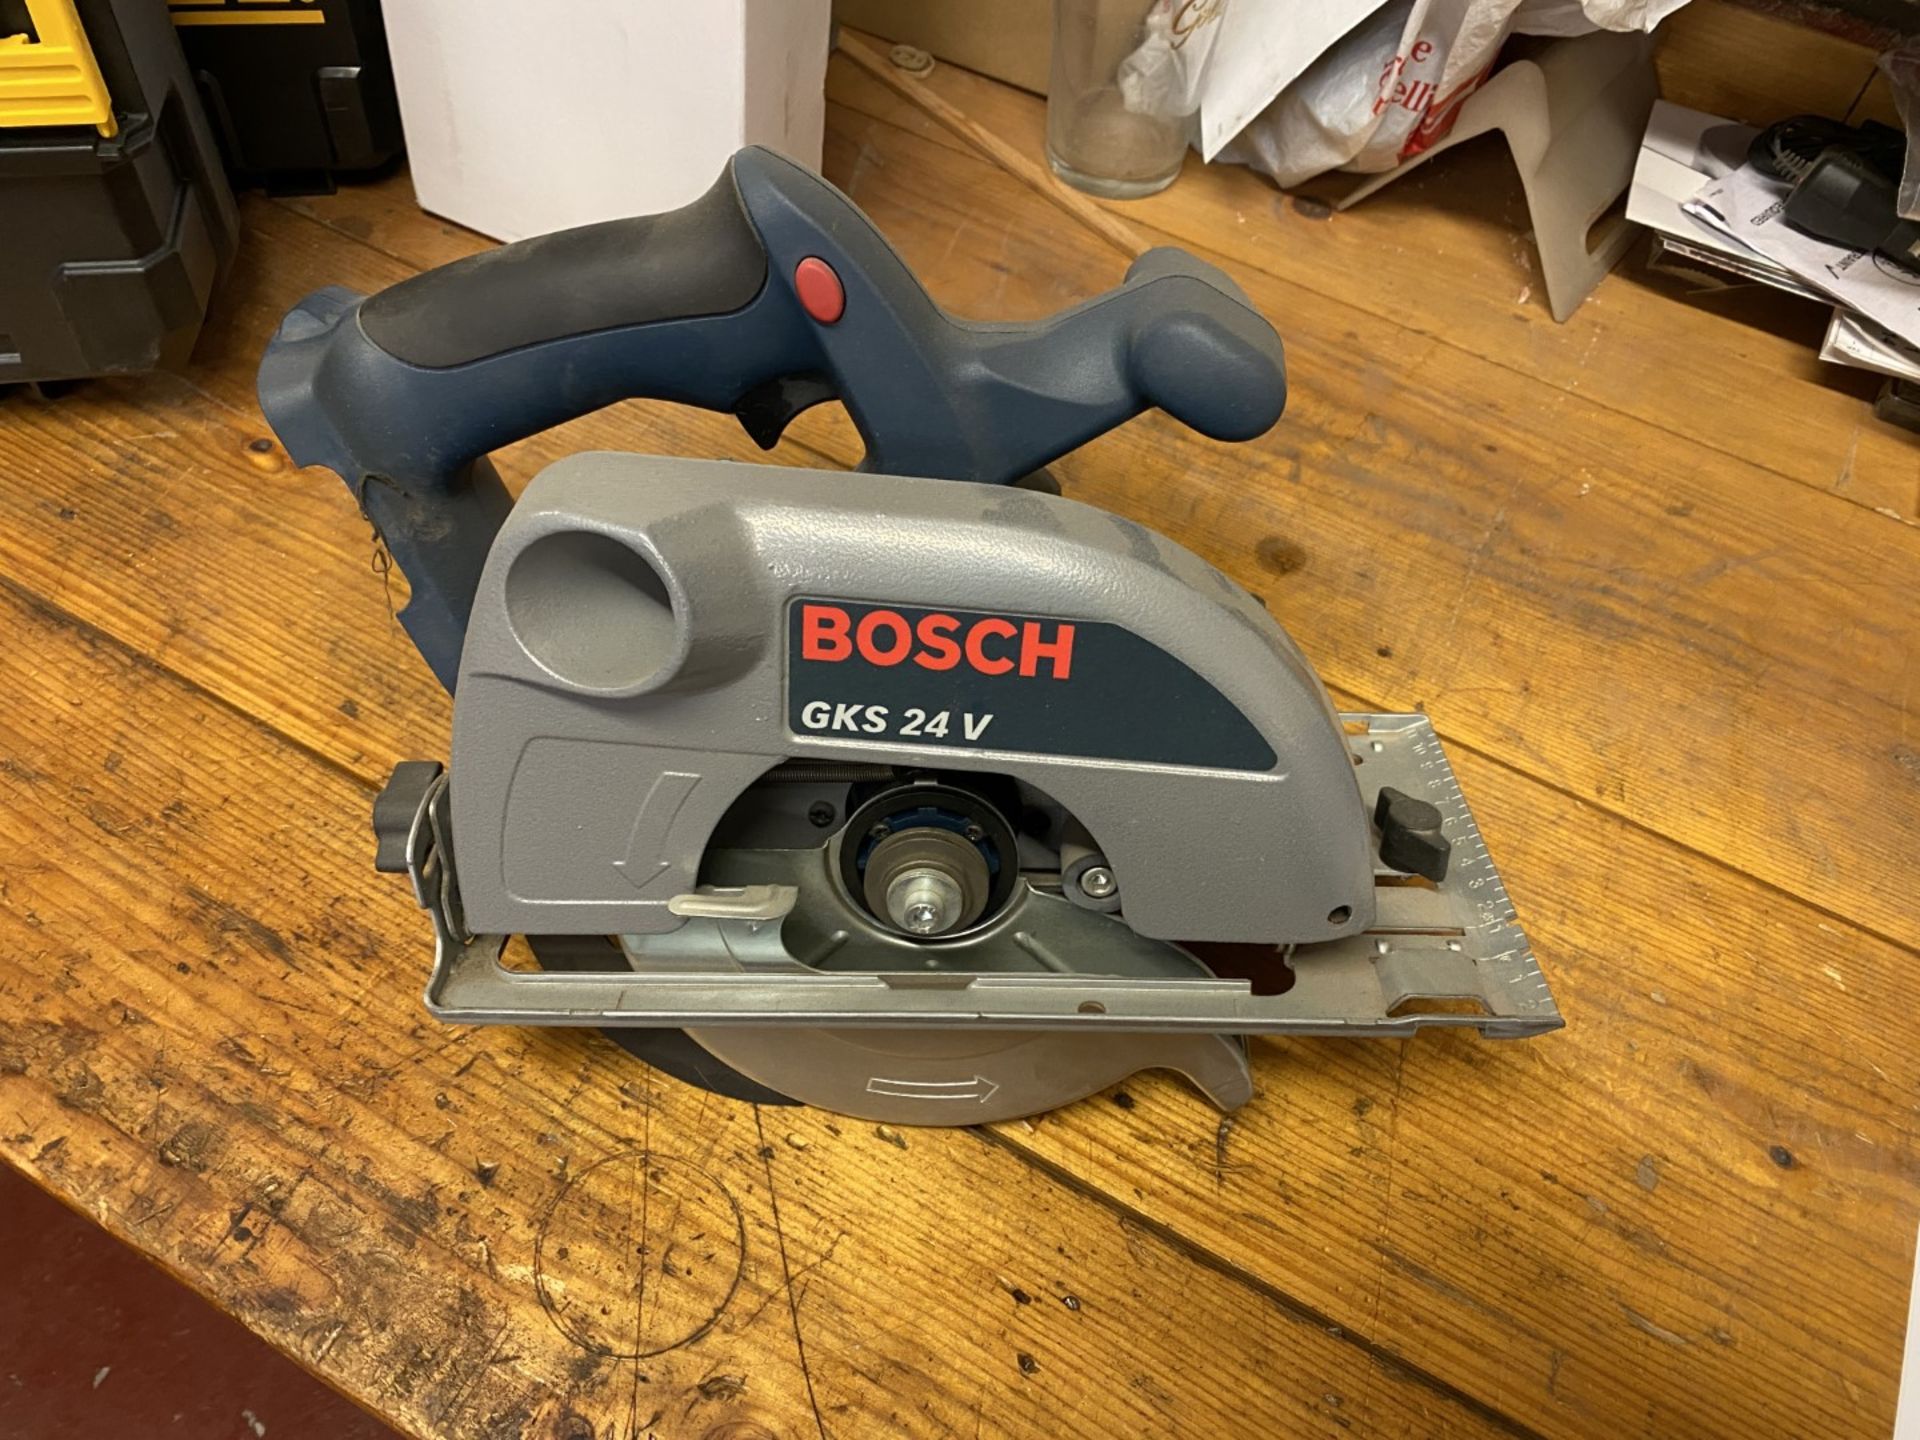 Bosch GKS 24v circular saw - PARTS ONLY - NOT TESTED